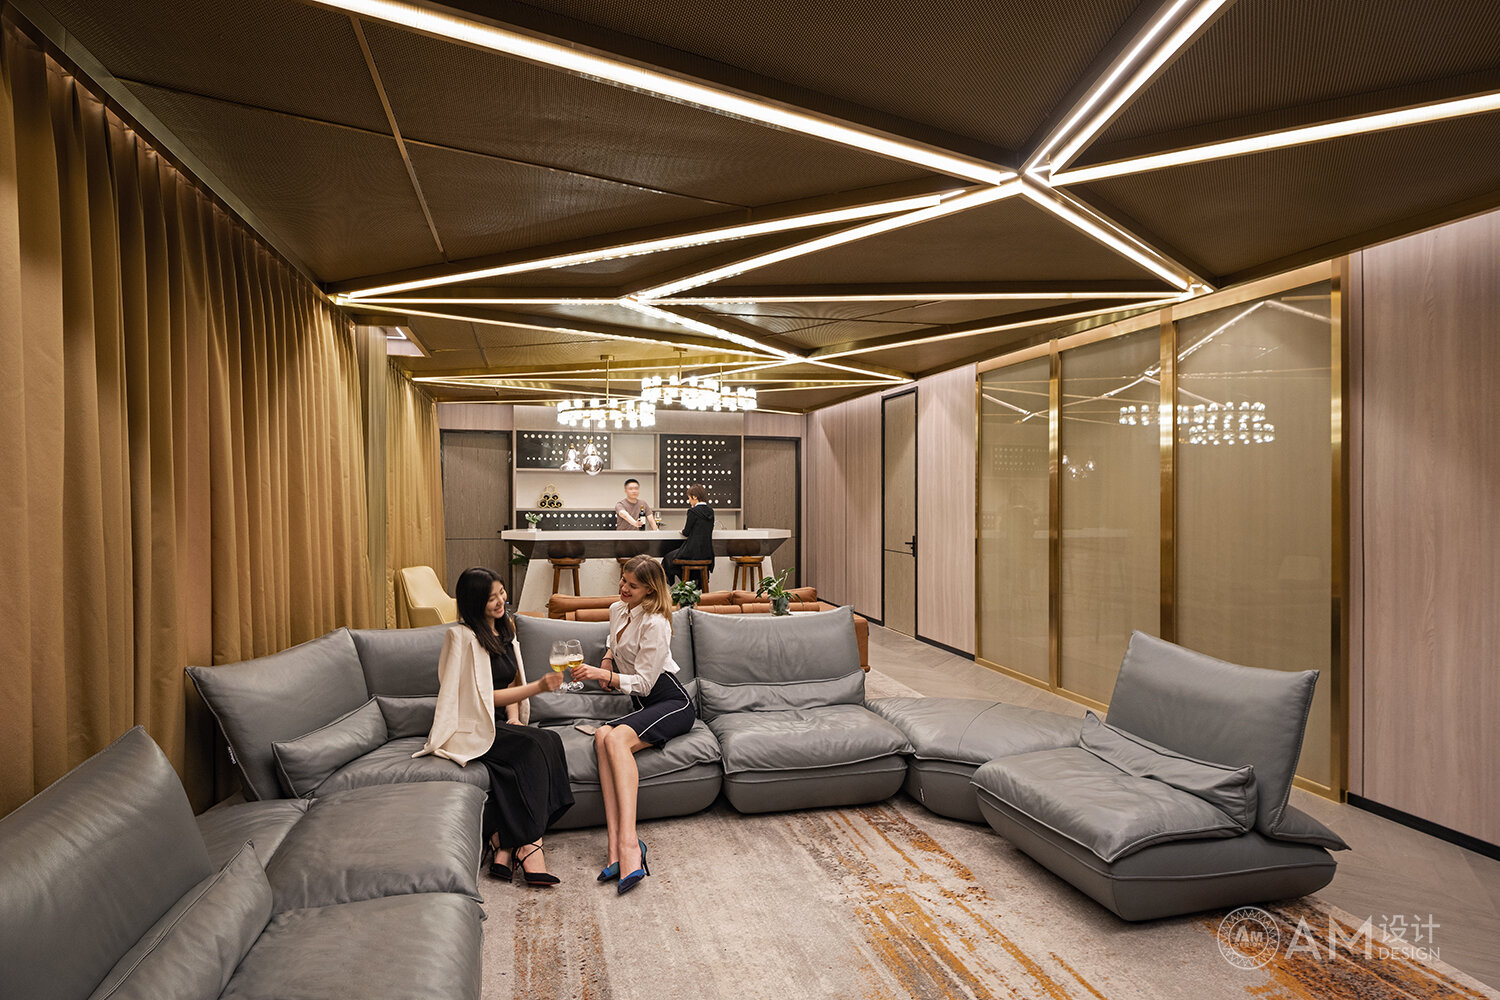 AM DESIGN | VIP reception area design for the office building of Beijing Taihe Music Group